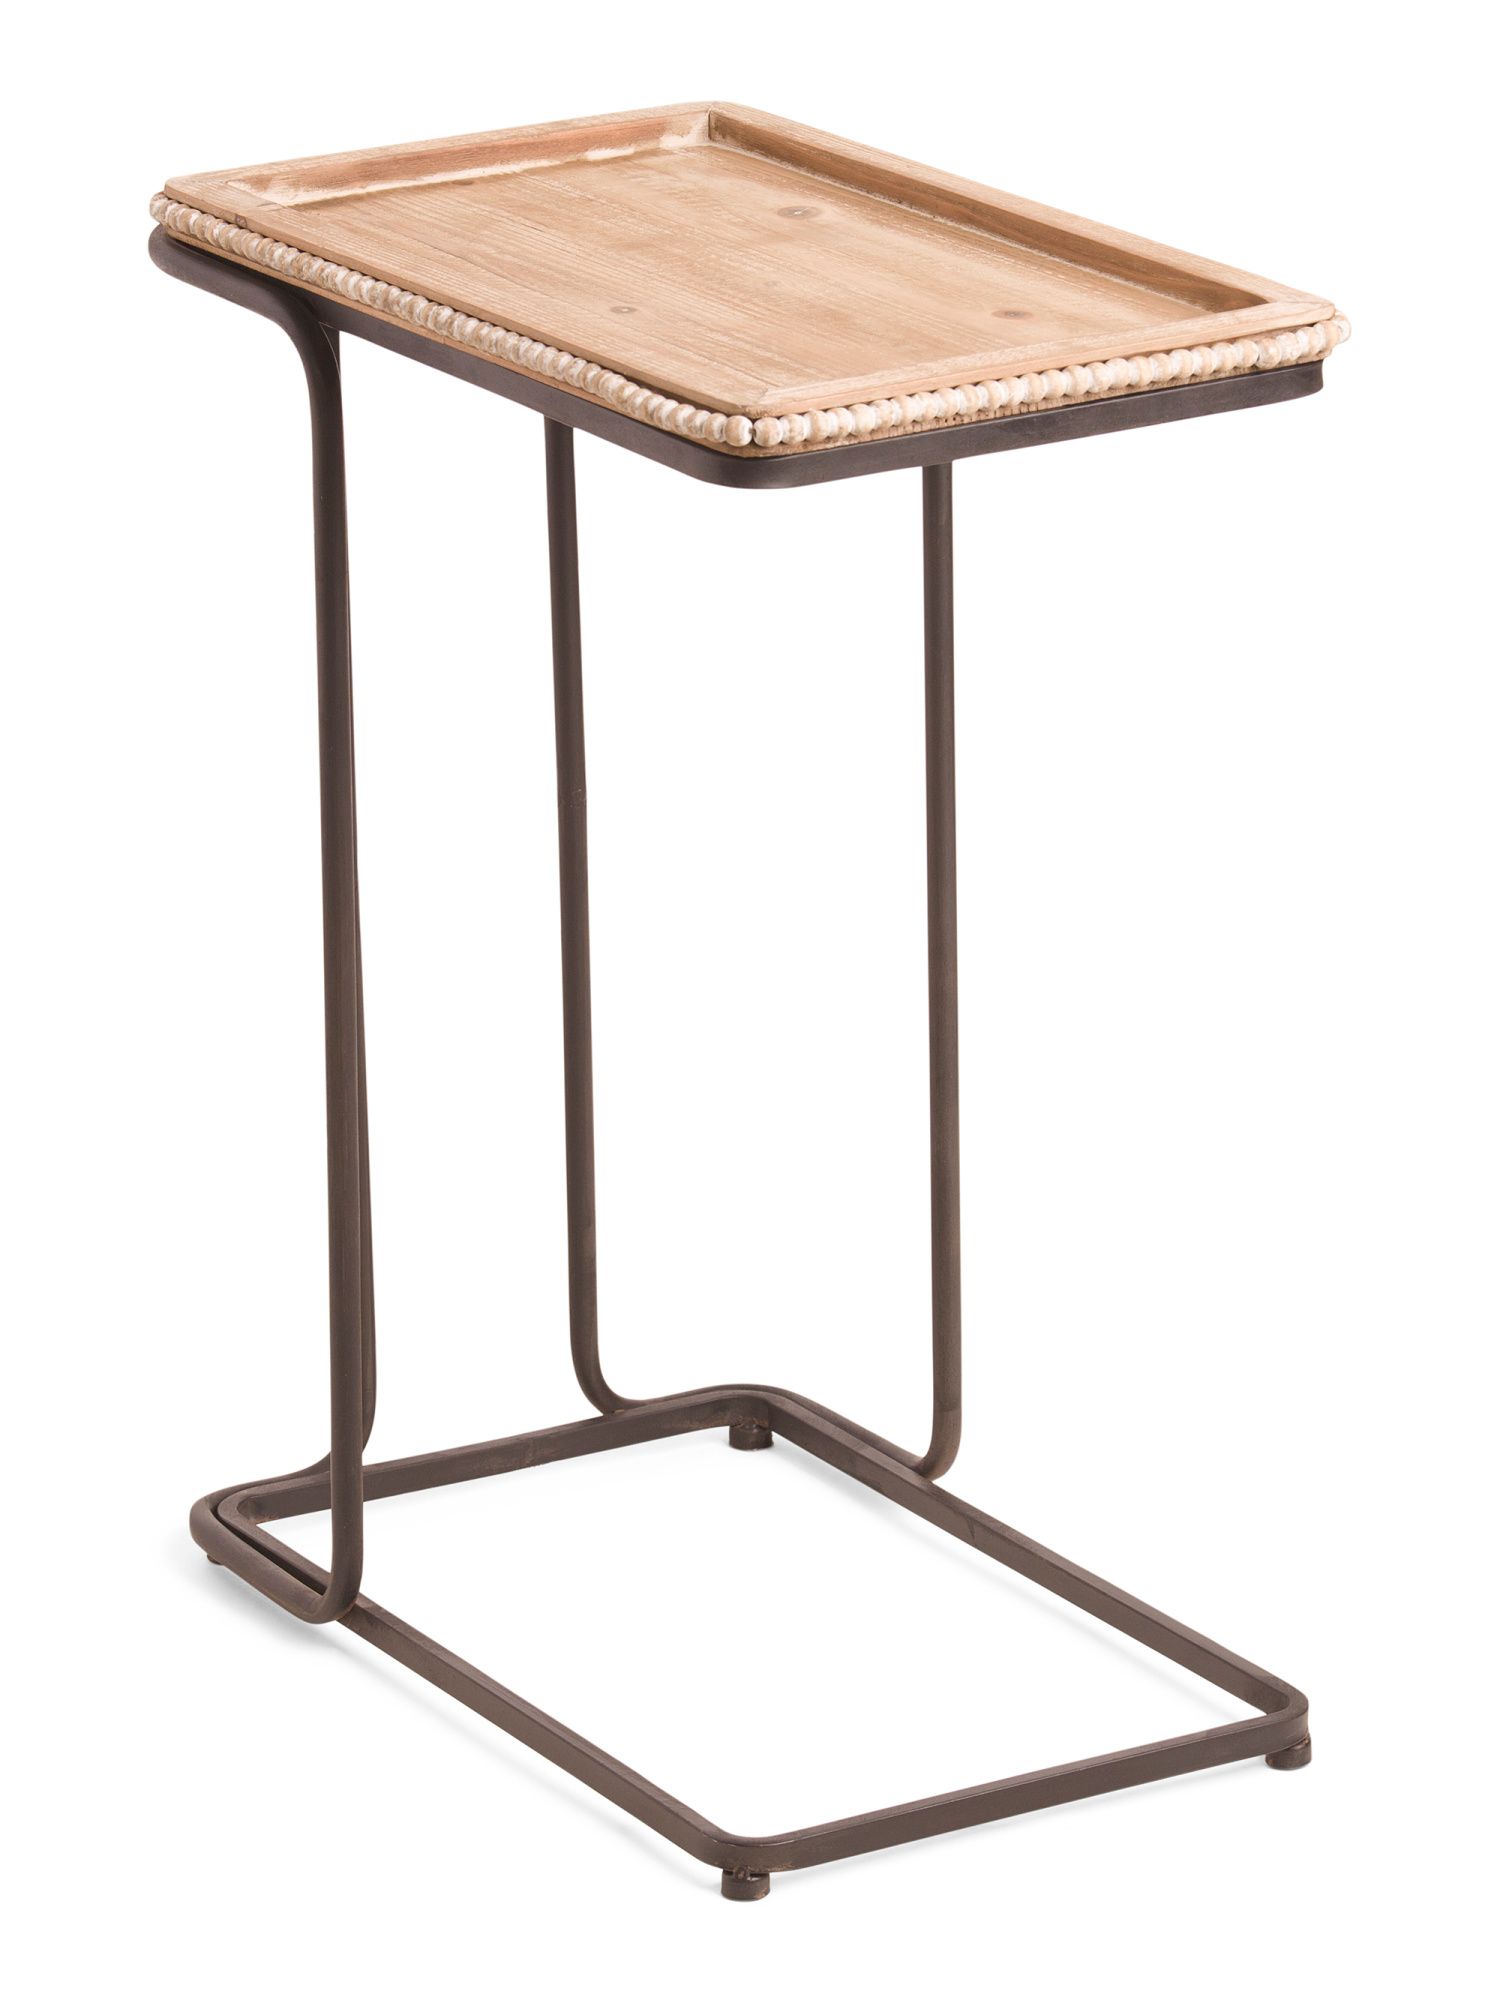 Metal And Wood C Table | TJ Maxx